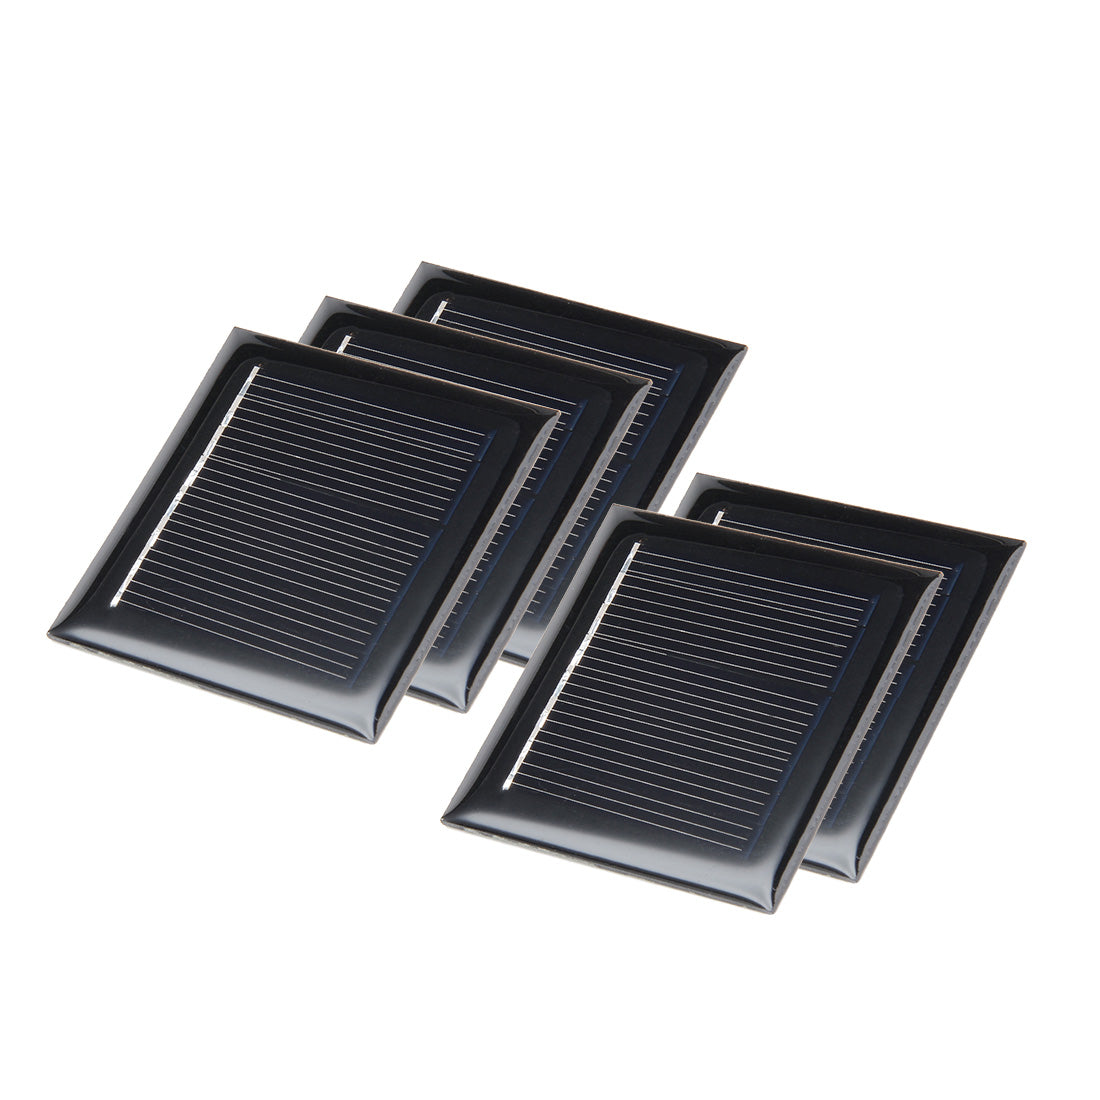 uxcell Uxcell 5Pcs 2V 50mA Poly Mini Solar Cell Panel Module DIY for  Light Toys Charger 54mm x 54mm